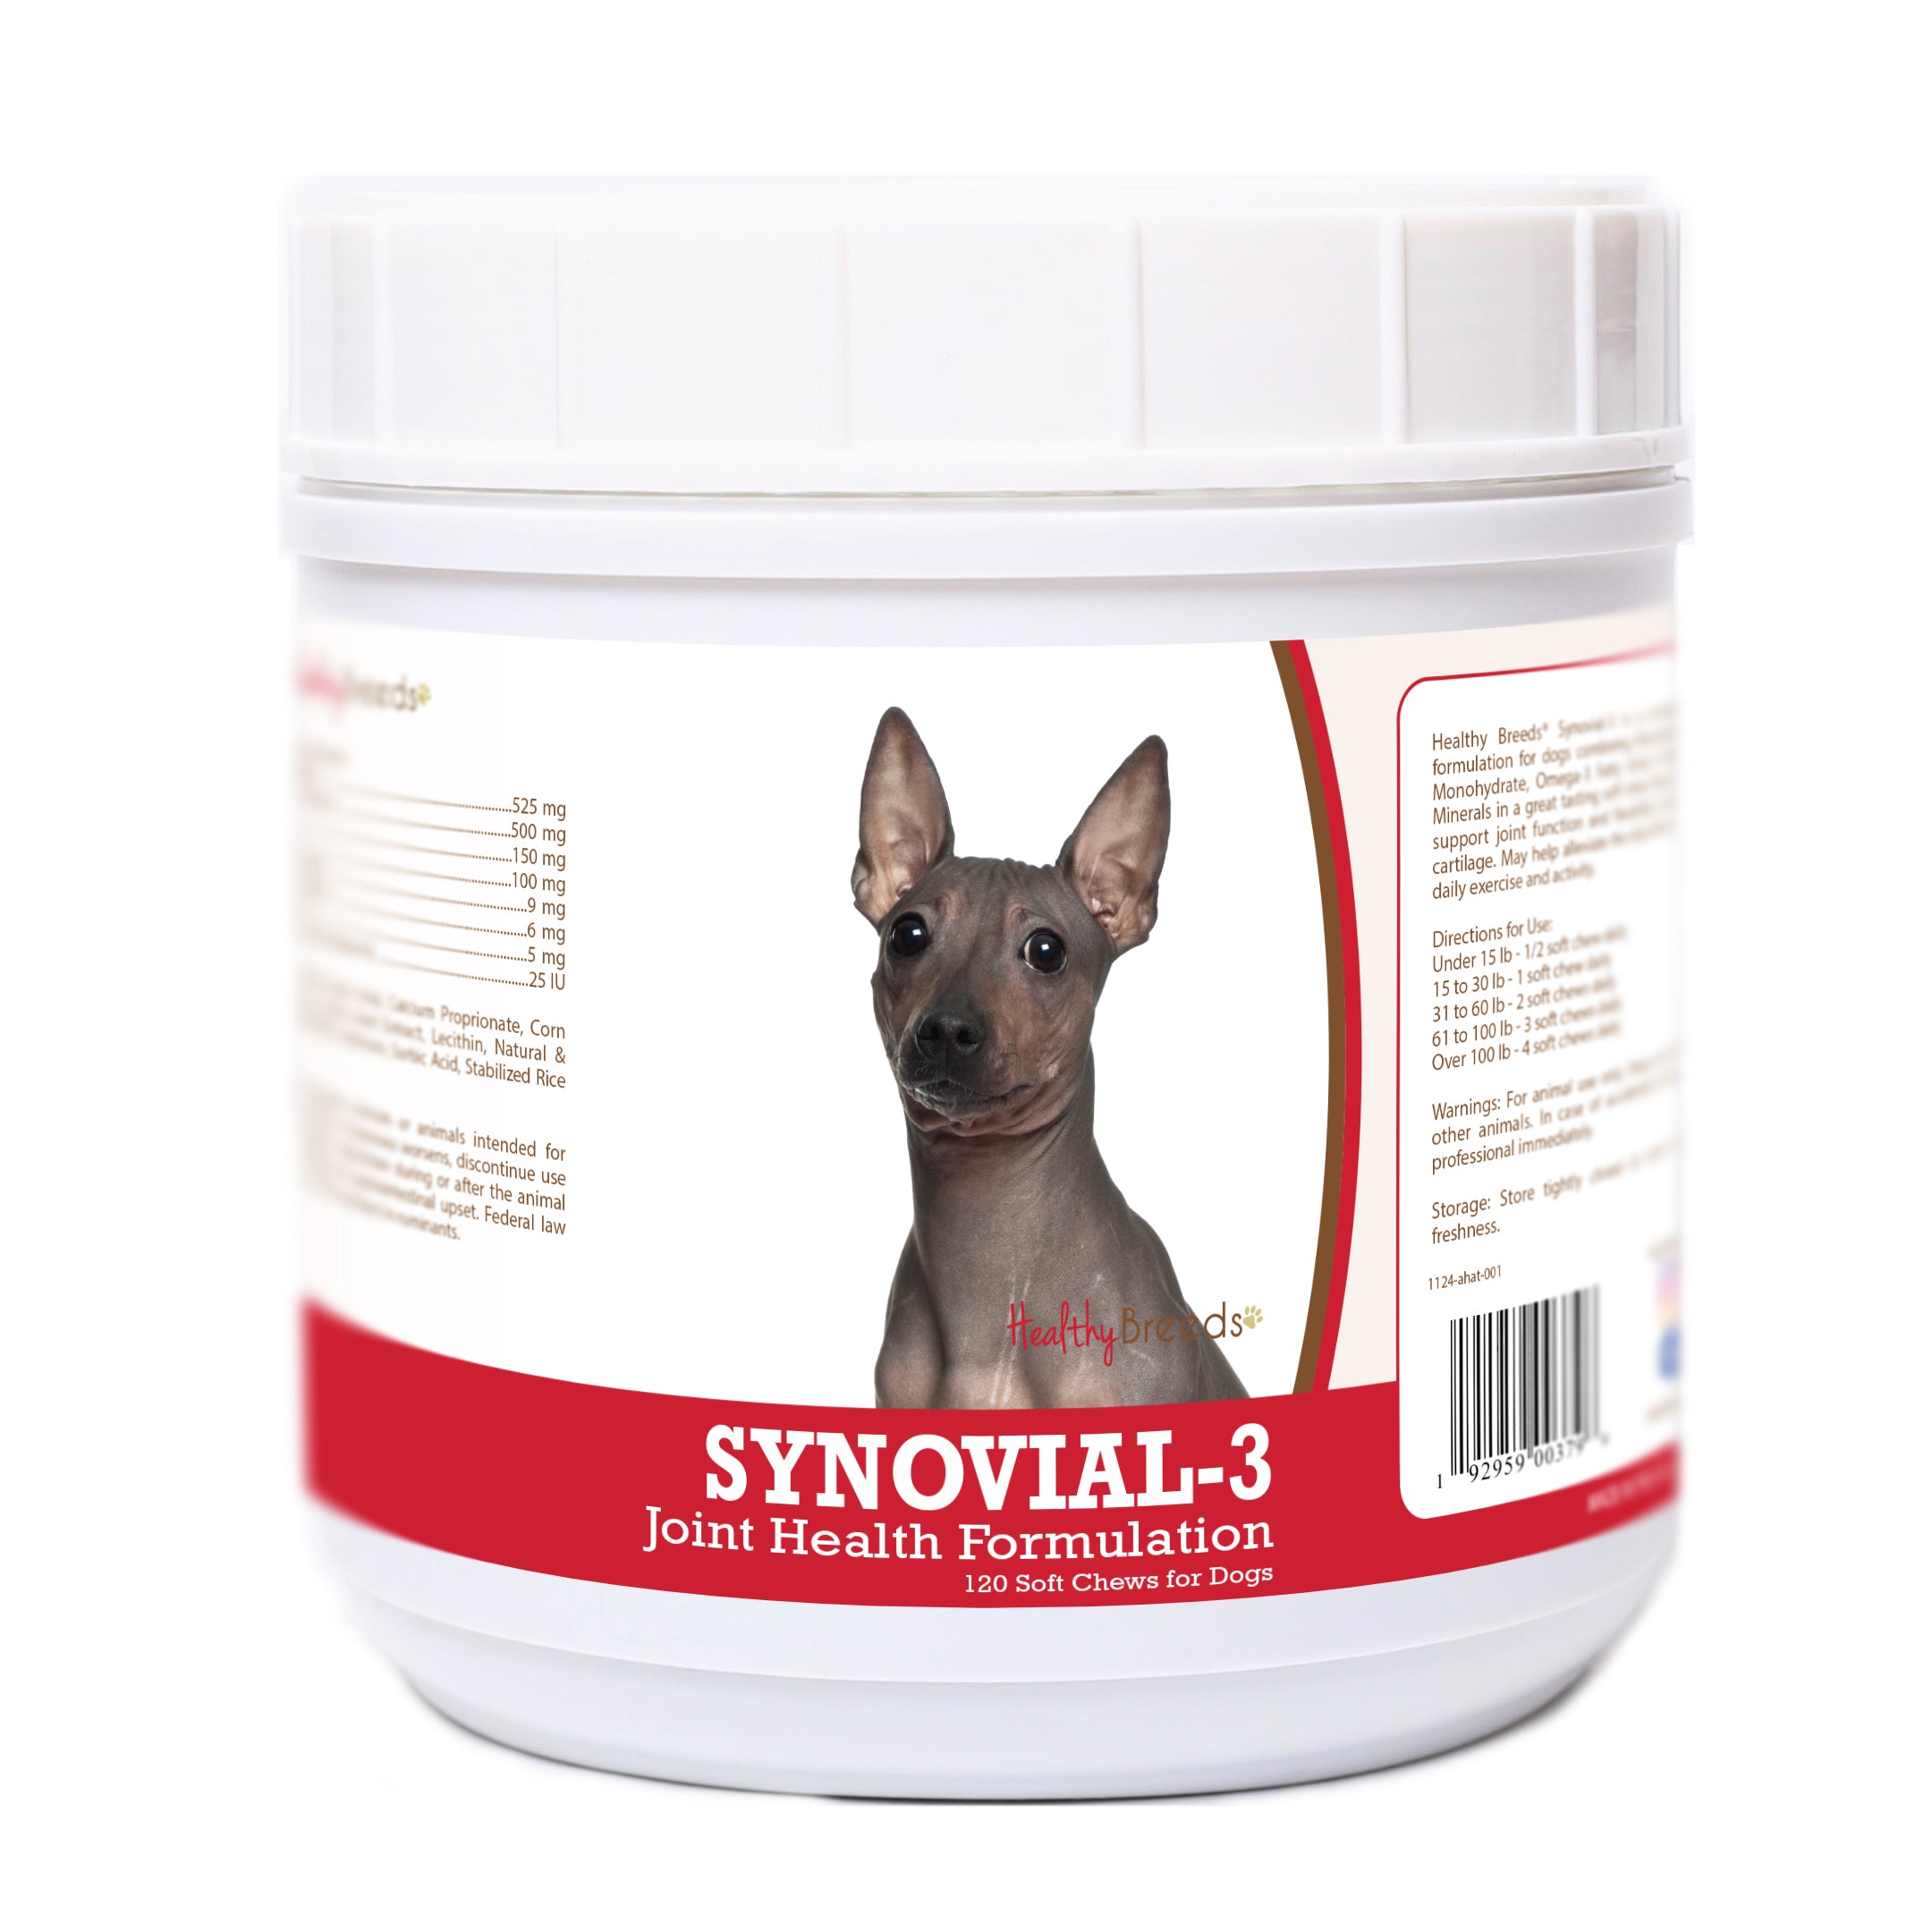 American Hairless Terrier Synovial-3 Joint Health Formulation Soft Chews 120 Count